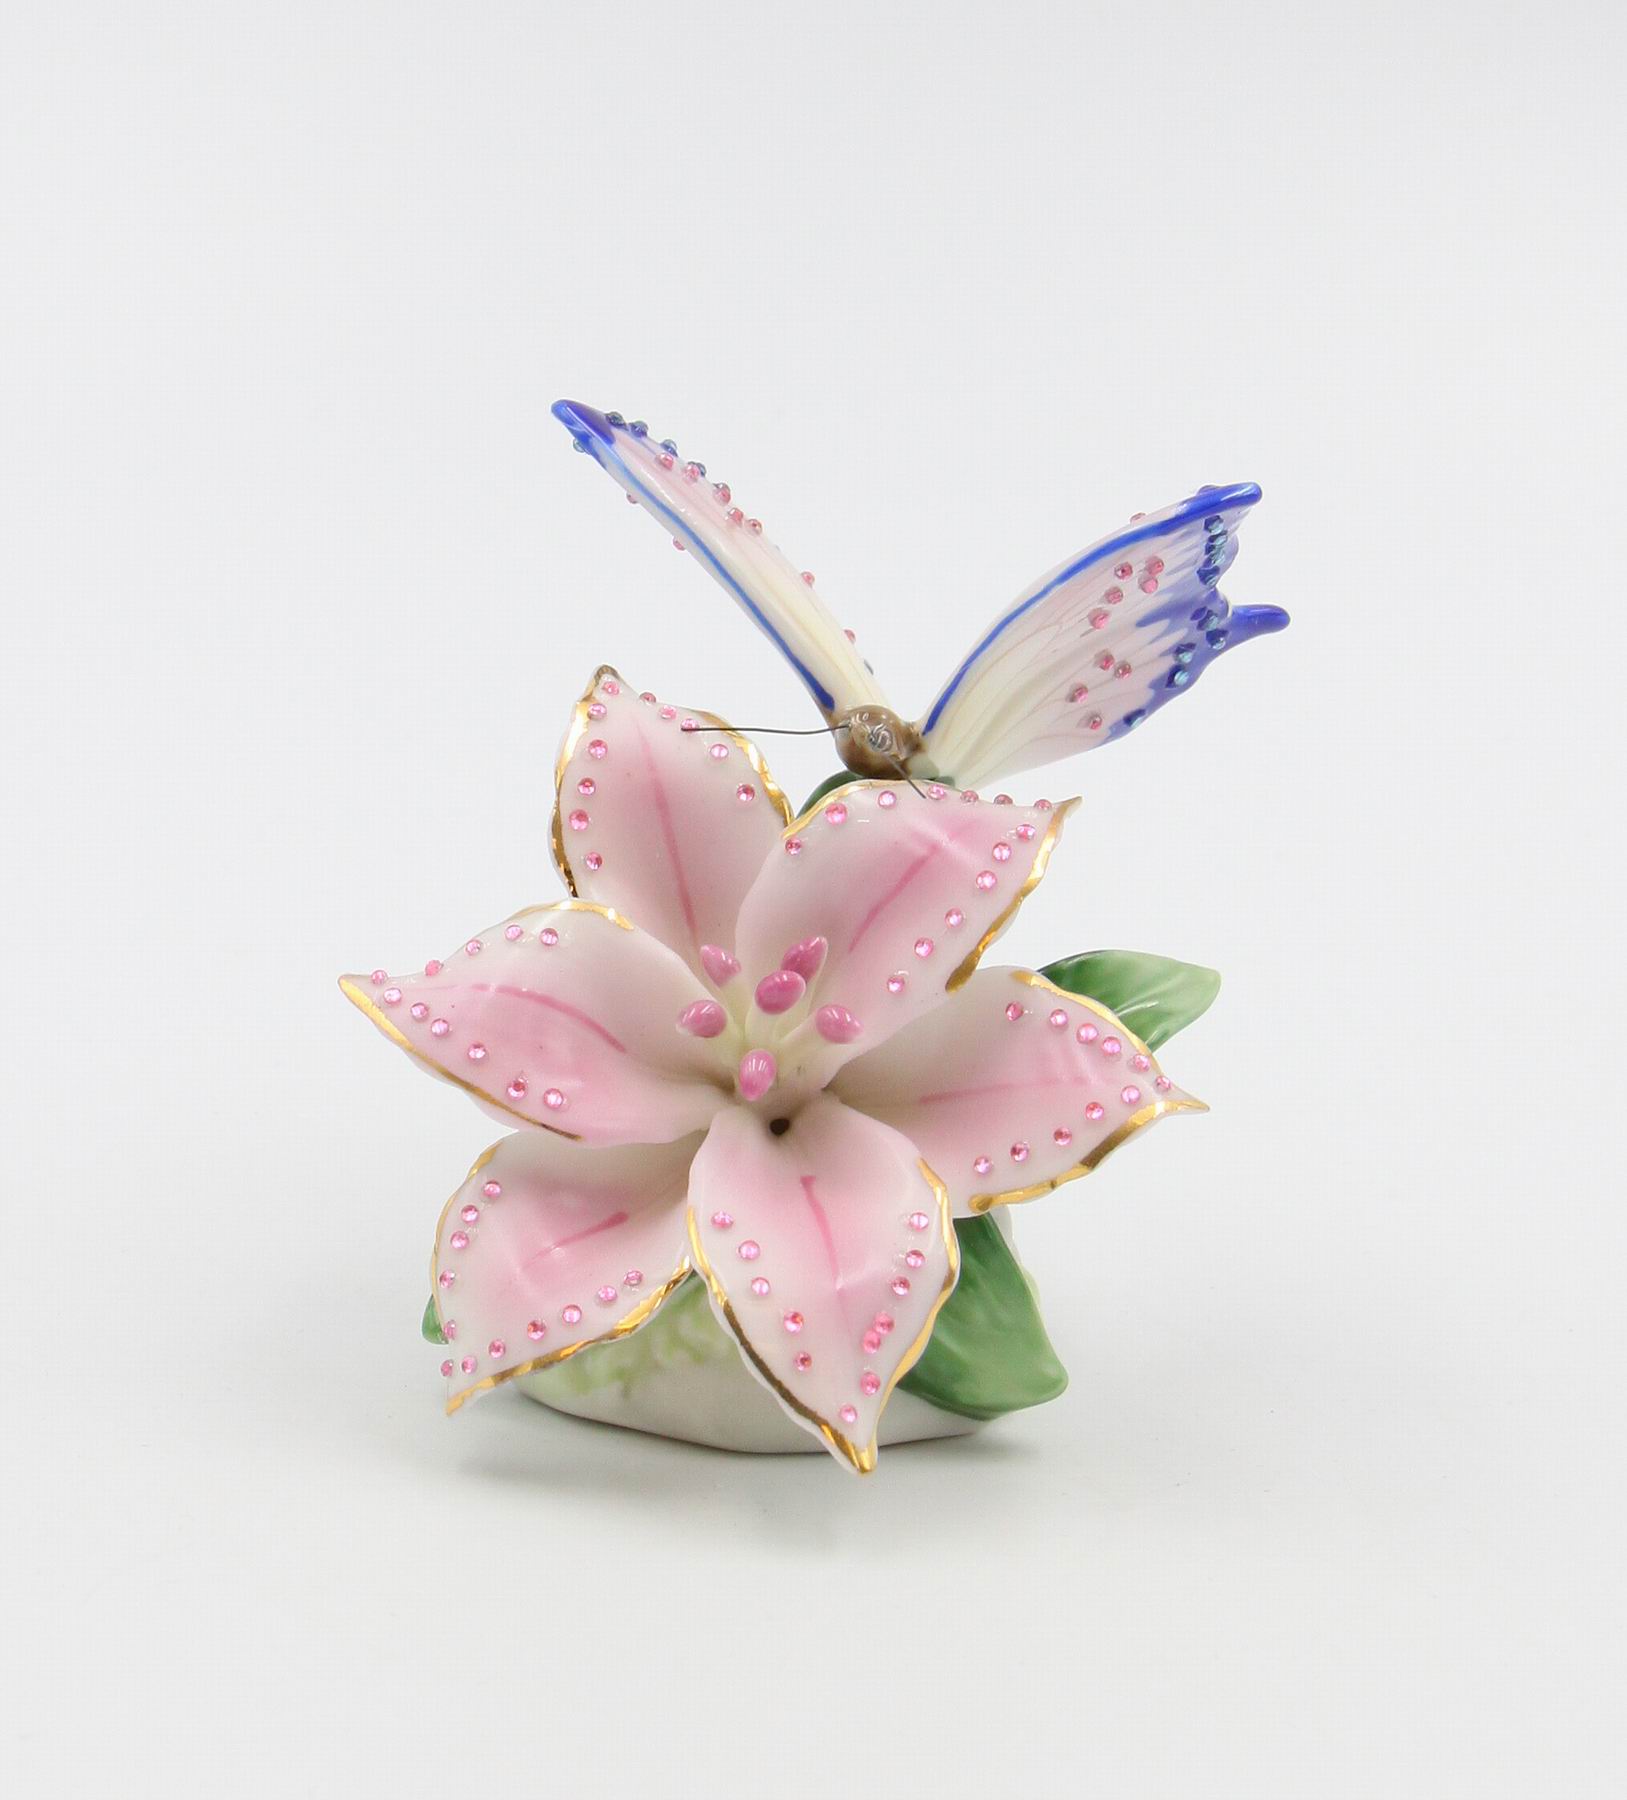 Jewel Lily With Butterfly Figurine - kevinsgiftshoppe